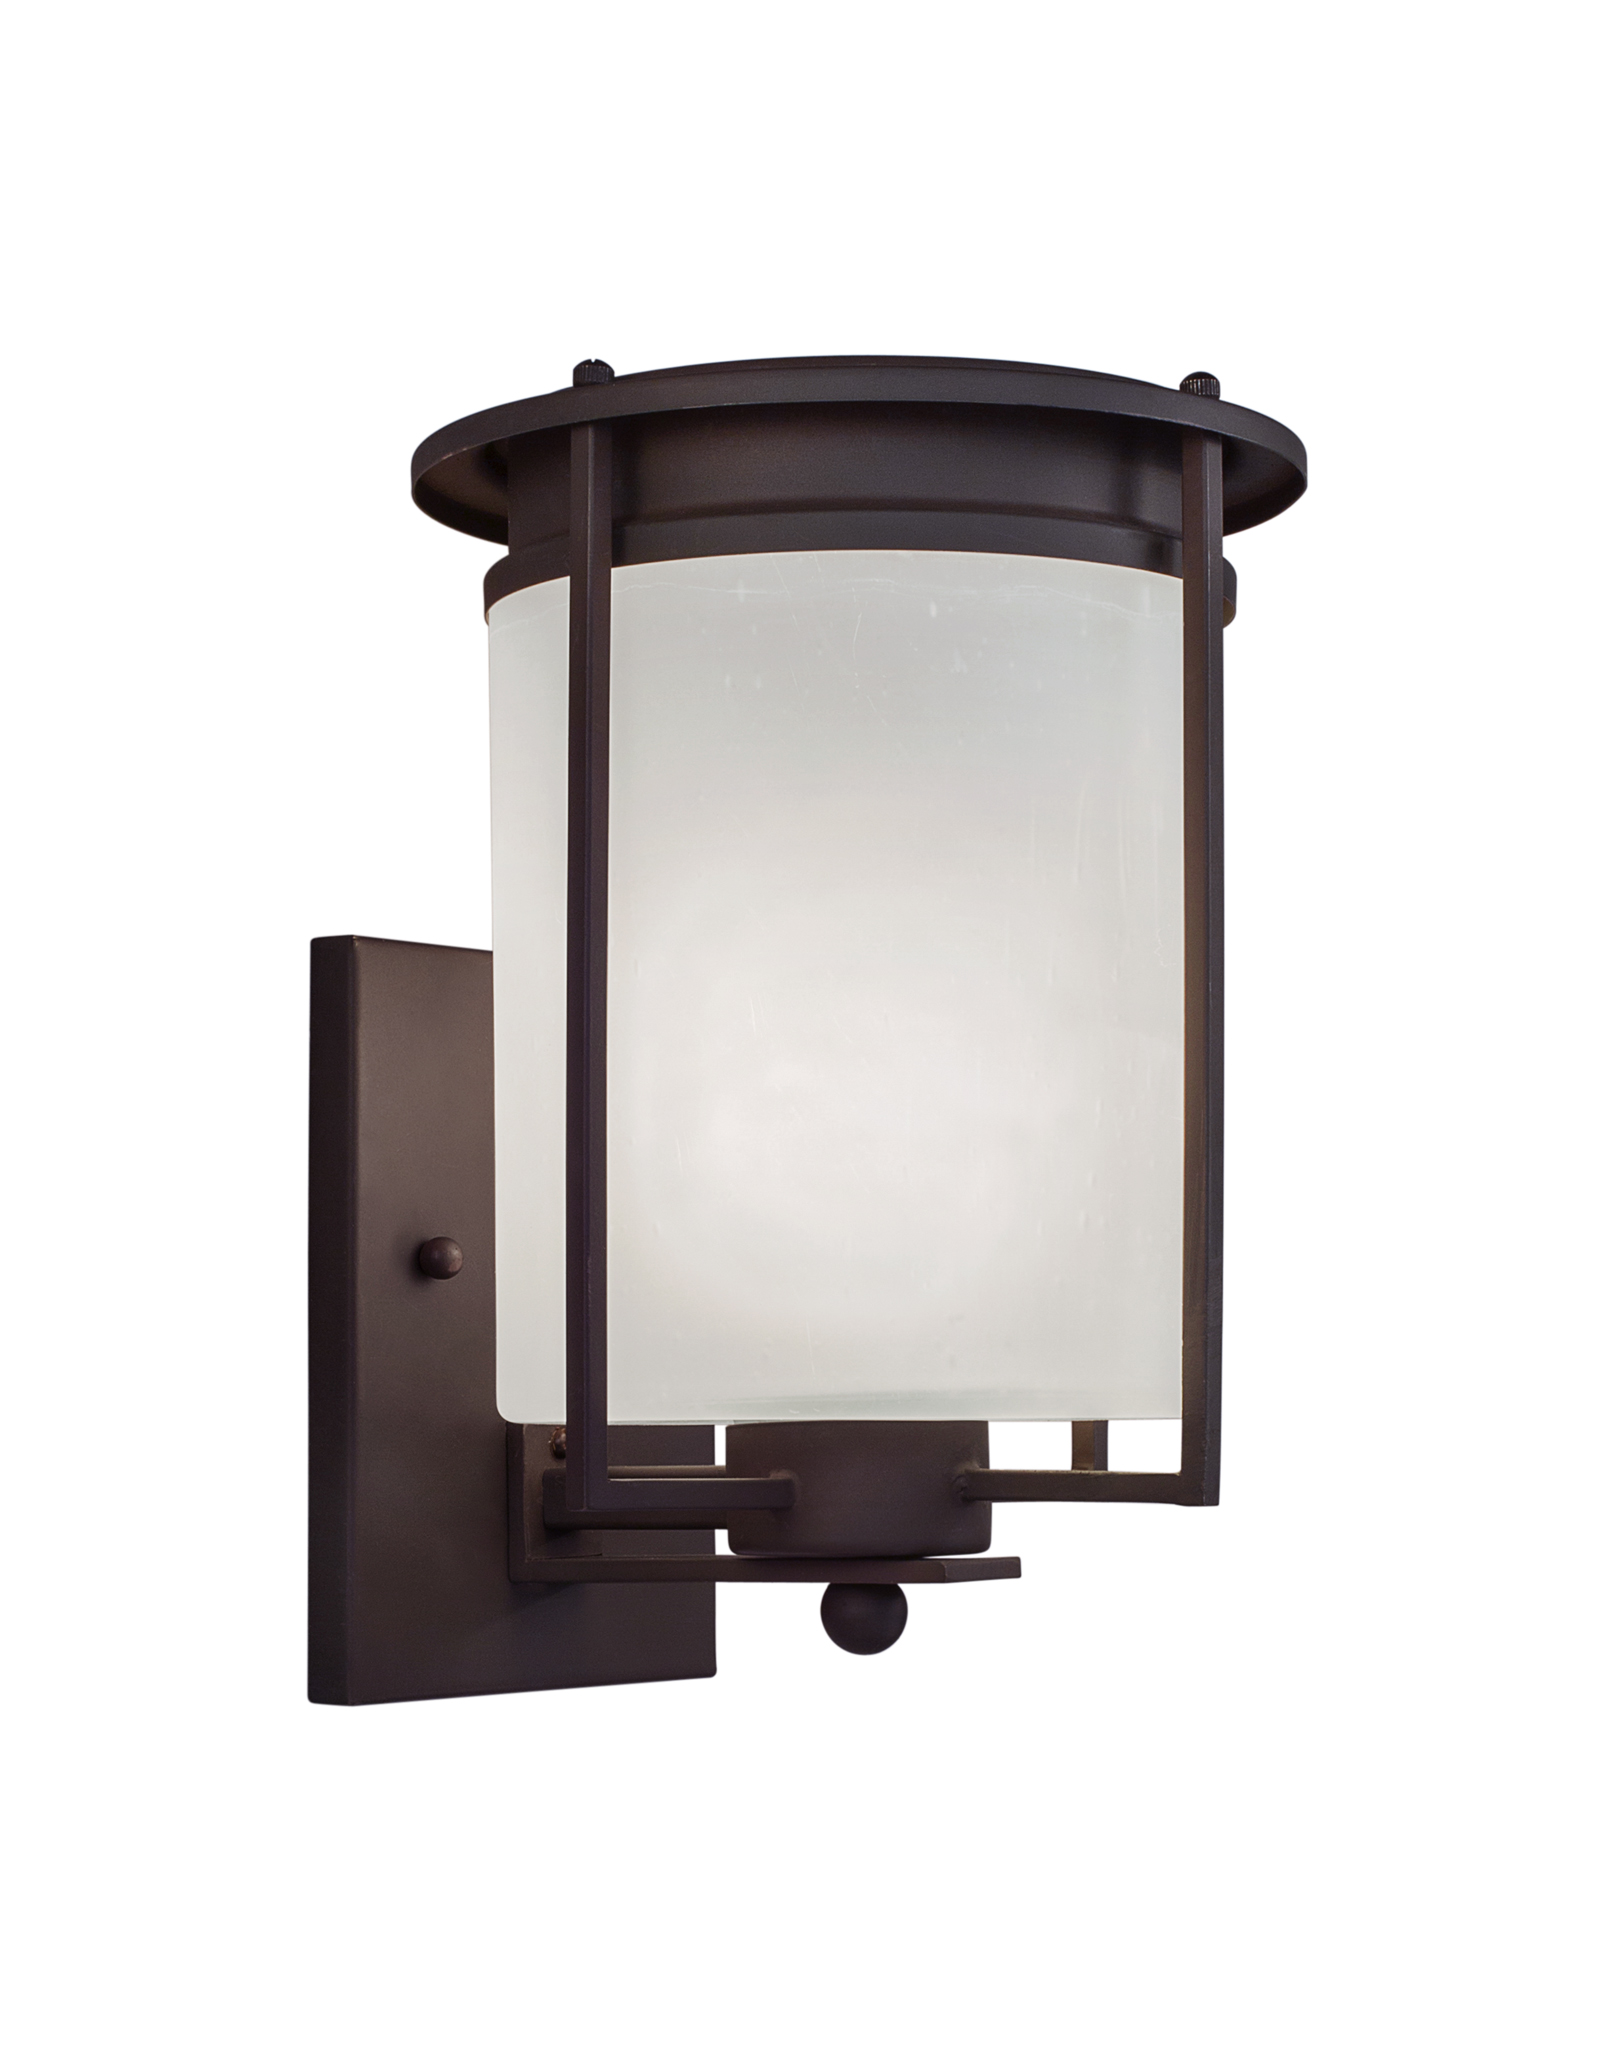 Forte Lighting 1146-01 1 Light 9-3/4" High Outdoor Wall Sconce - Bronze - image 3 of 4